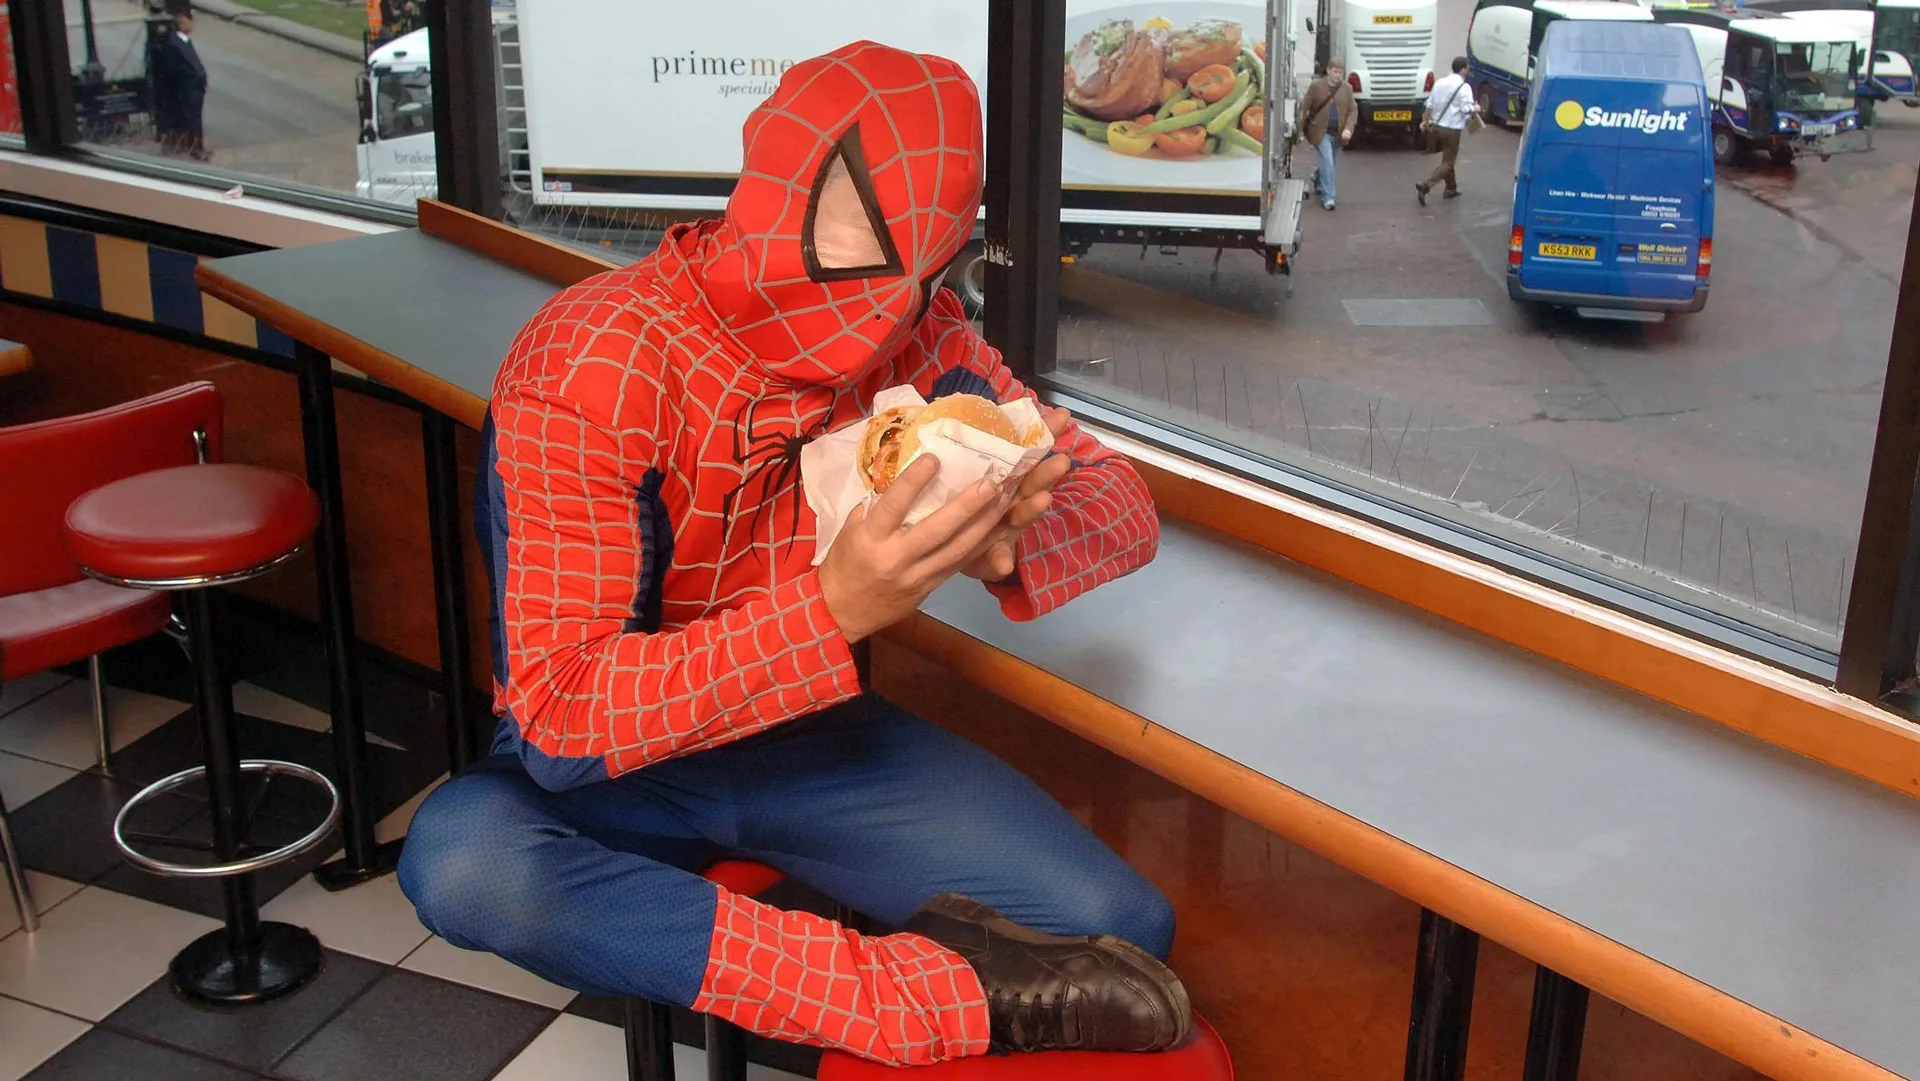 A photograph of a man dressed as Spiderman eating a burger in a restaurant by a window looking out to a street with cars